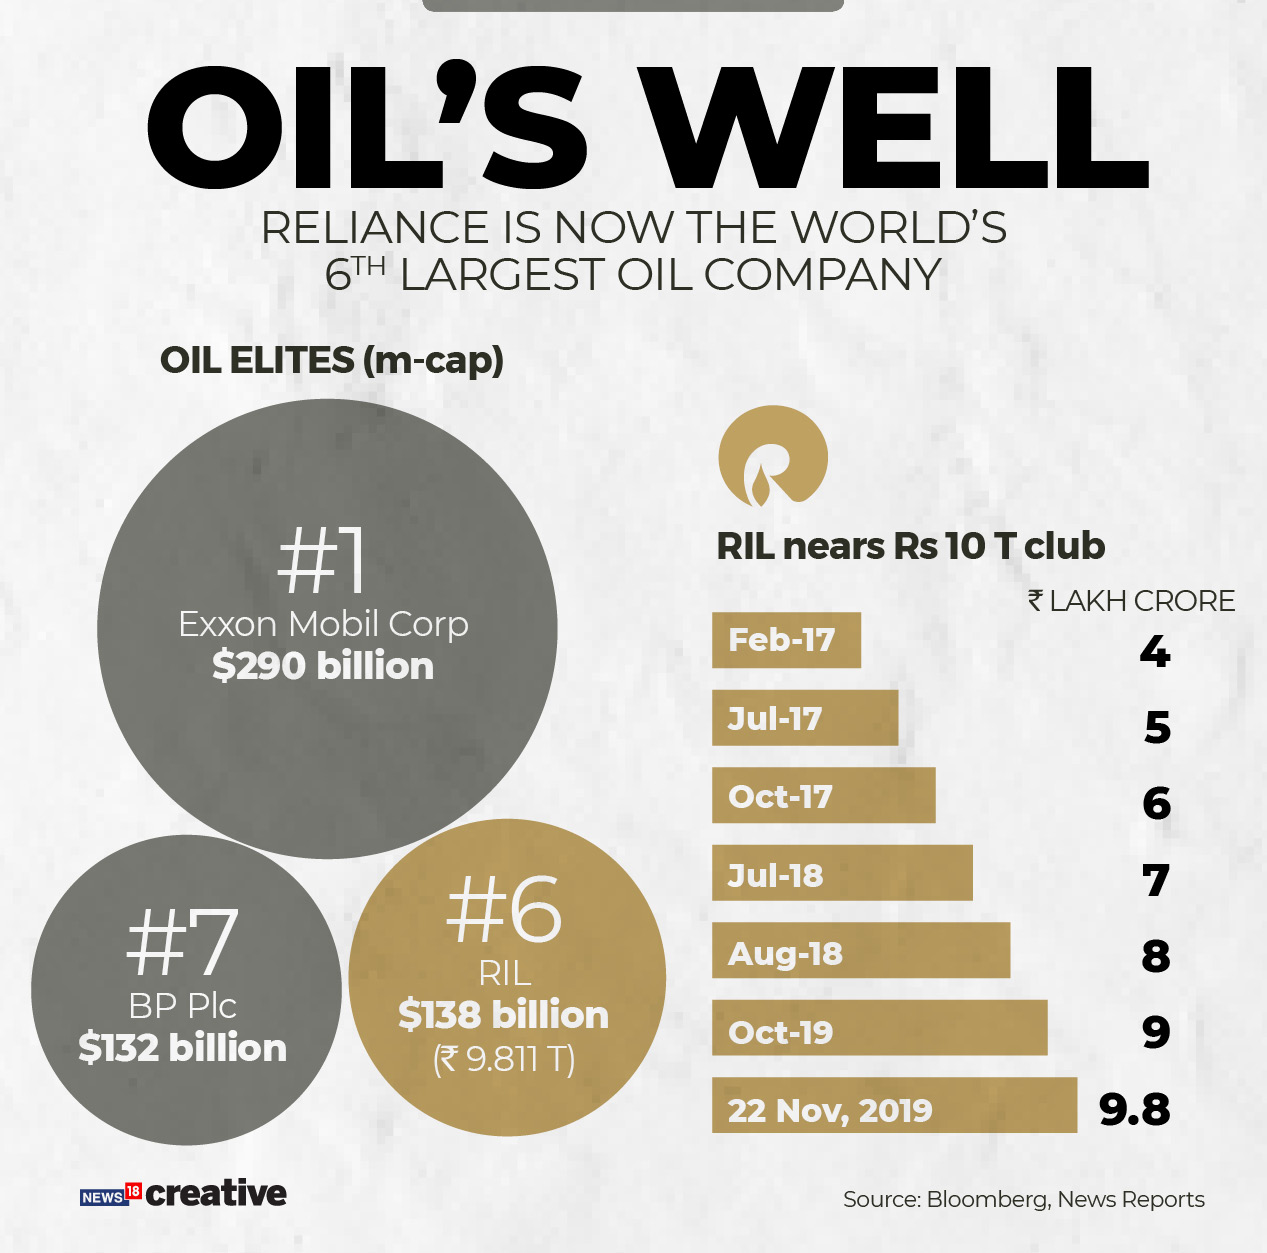 Infographic: Reliance is now the world's sixth largest oil company